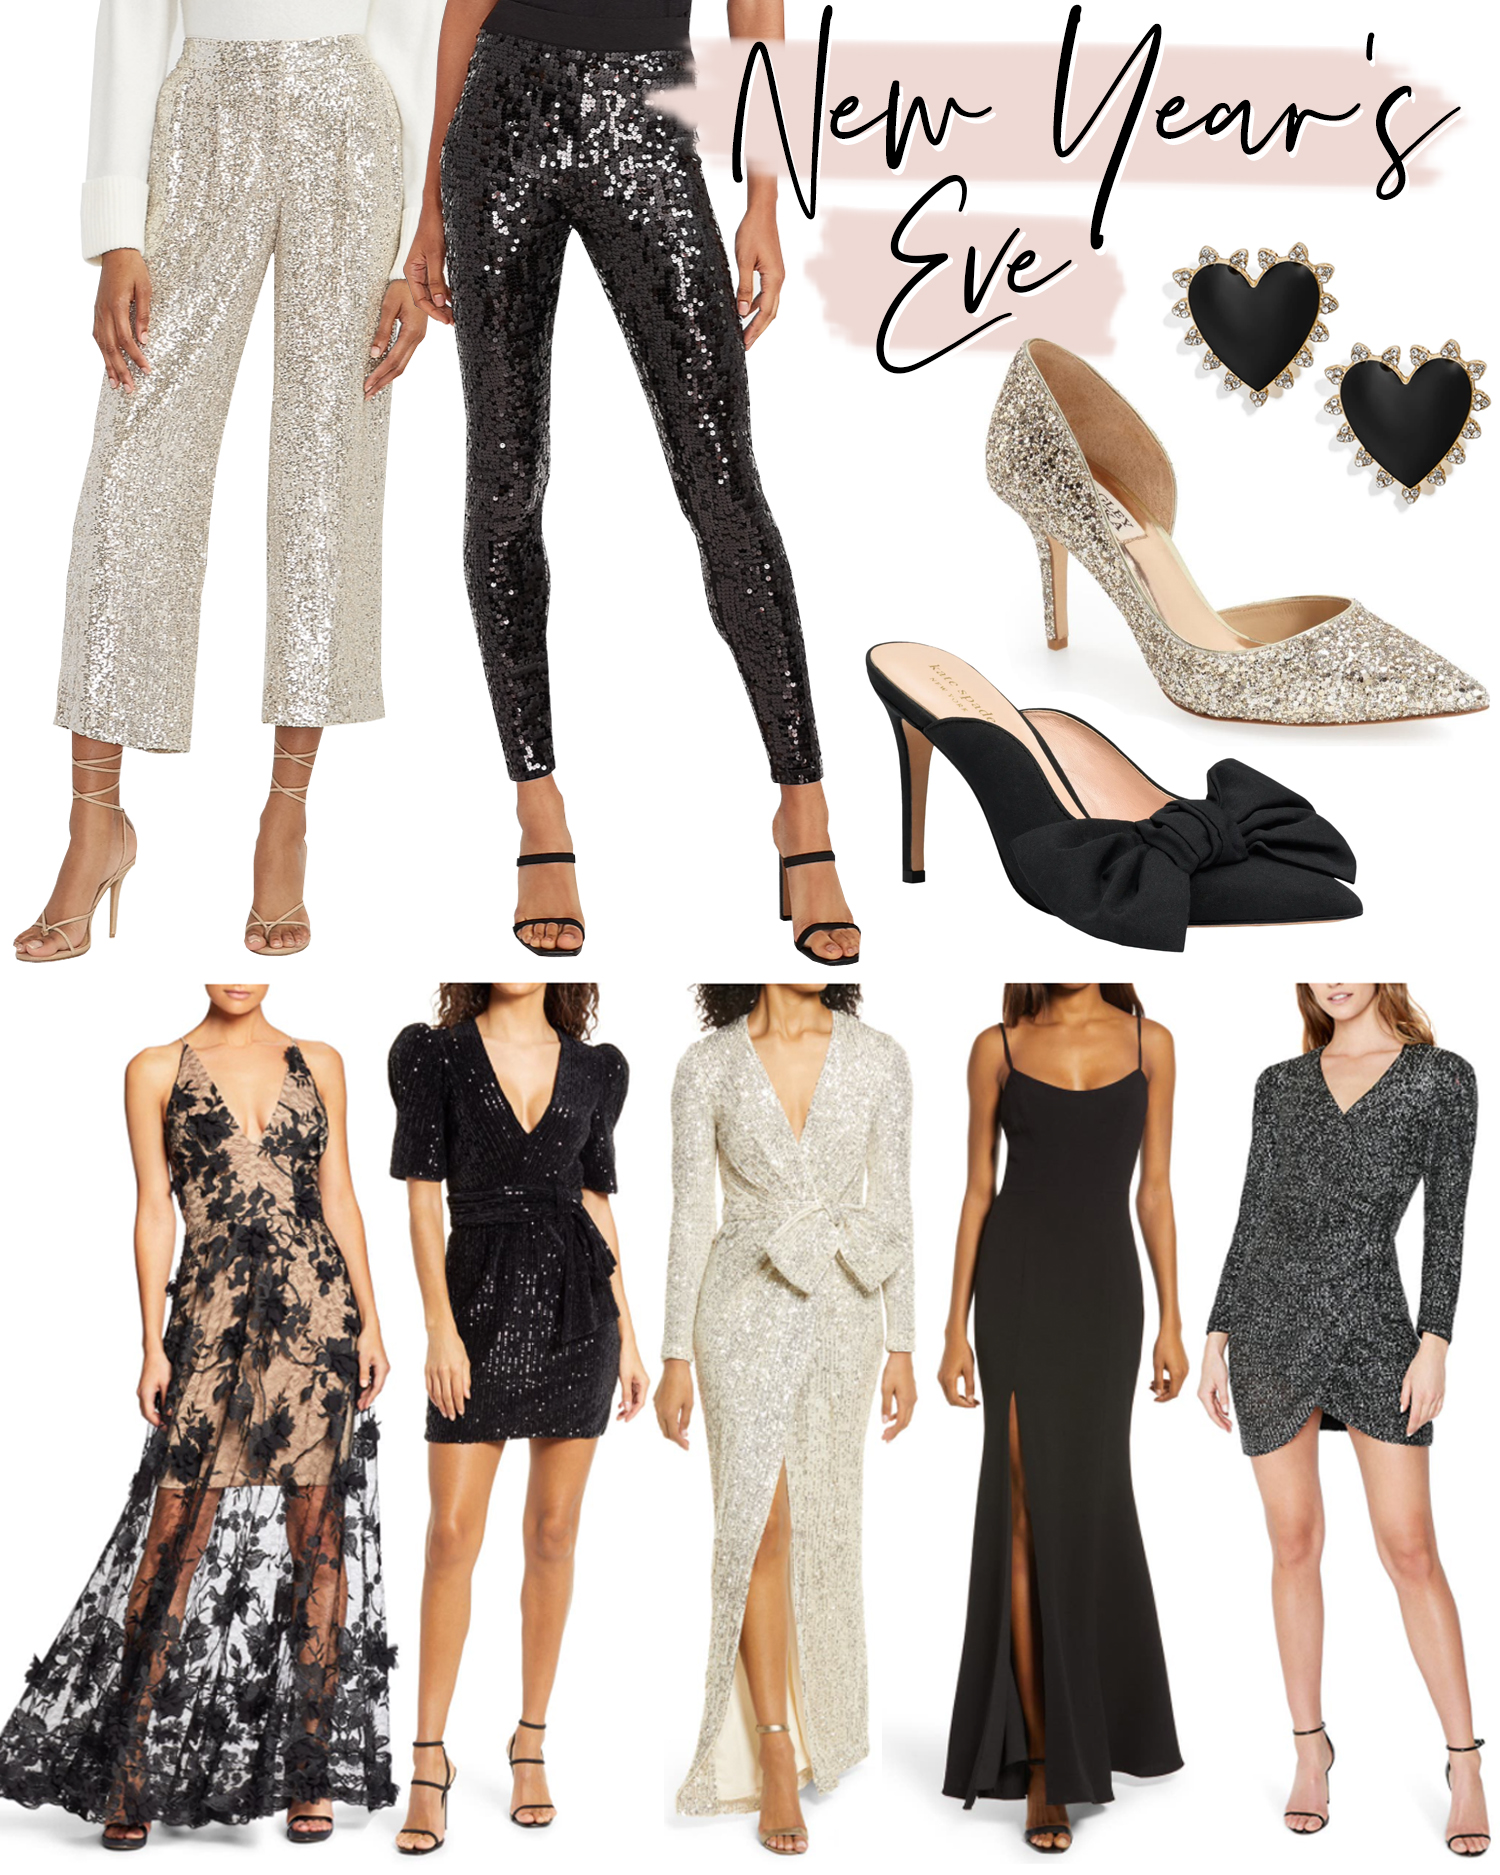 New Year's Eve Outfits - Southern Curls & Pearls